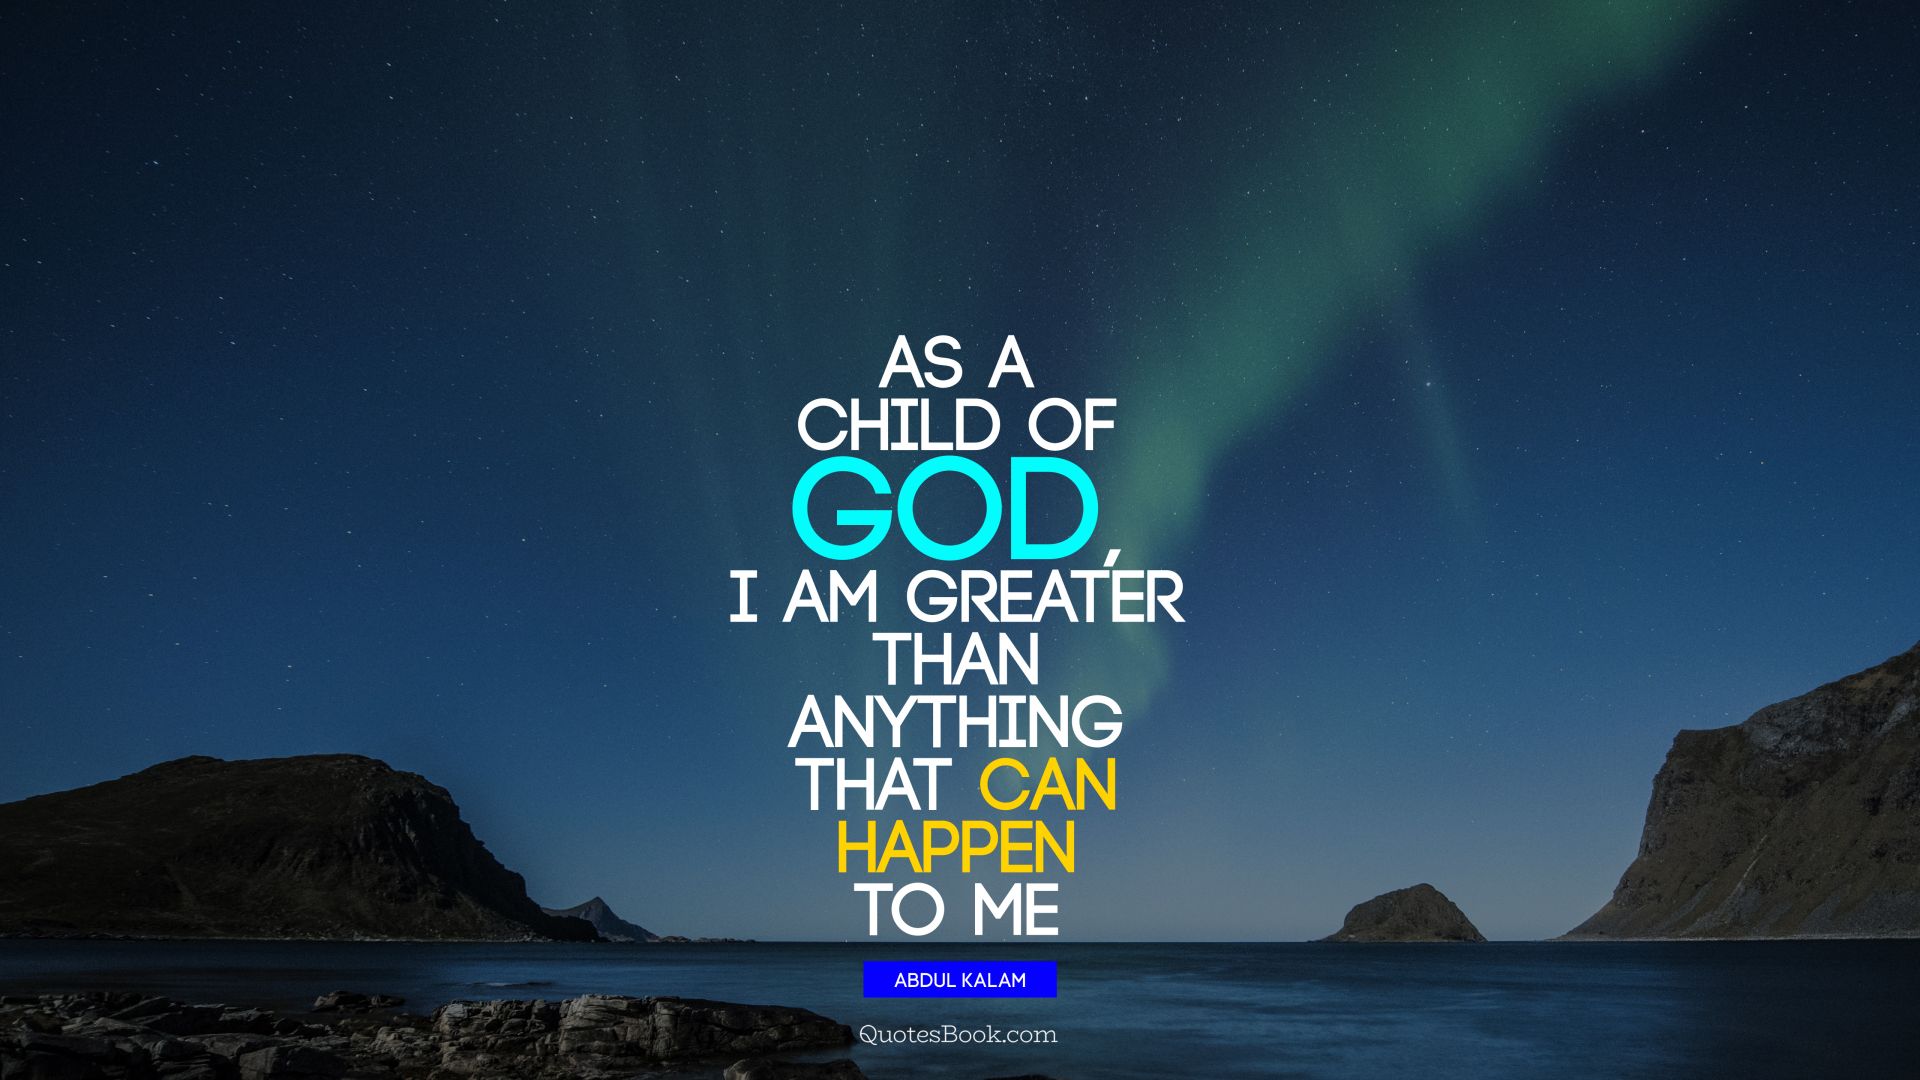 As a child of God, I am greater than anything that can happen to me. - Quote by Abdul Kalam